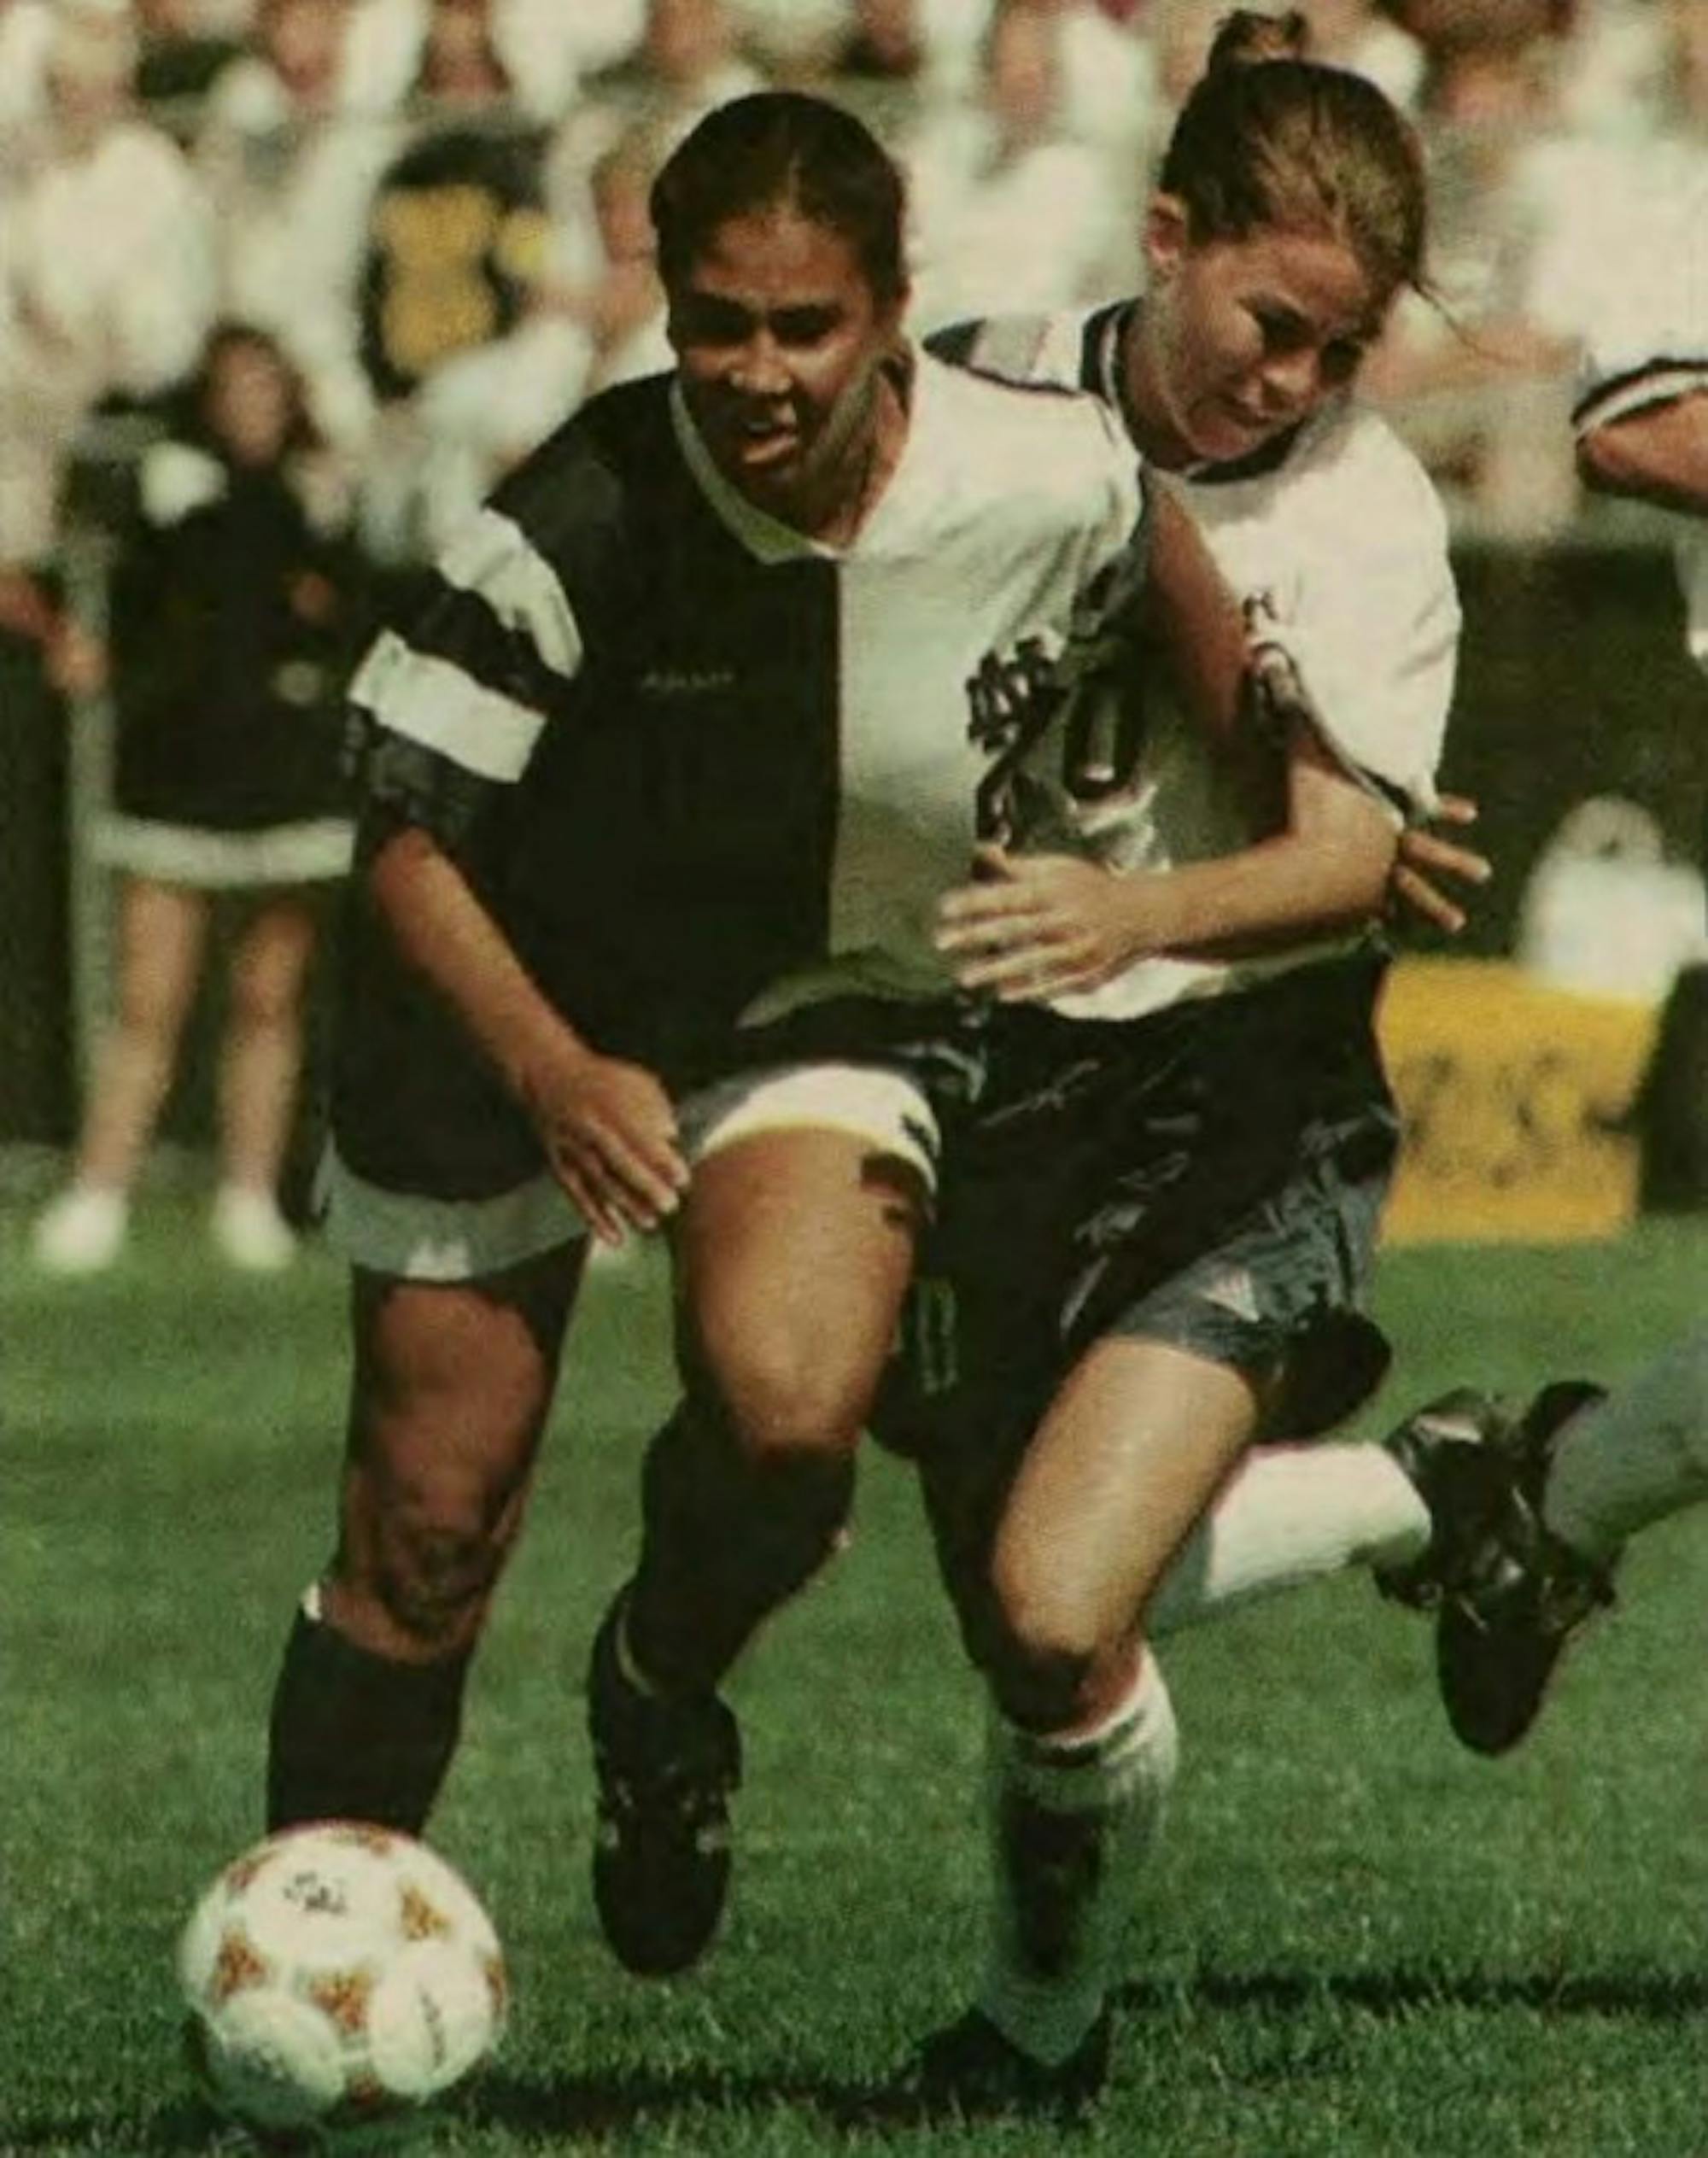 Shannon Boxx dribbles down the field in a game while at Notre Dame. Boxx competed for the Irish from 1995 to 1998. She was a part of the Notre Dame squad that won the program’s first national title in 1995.